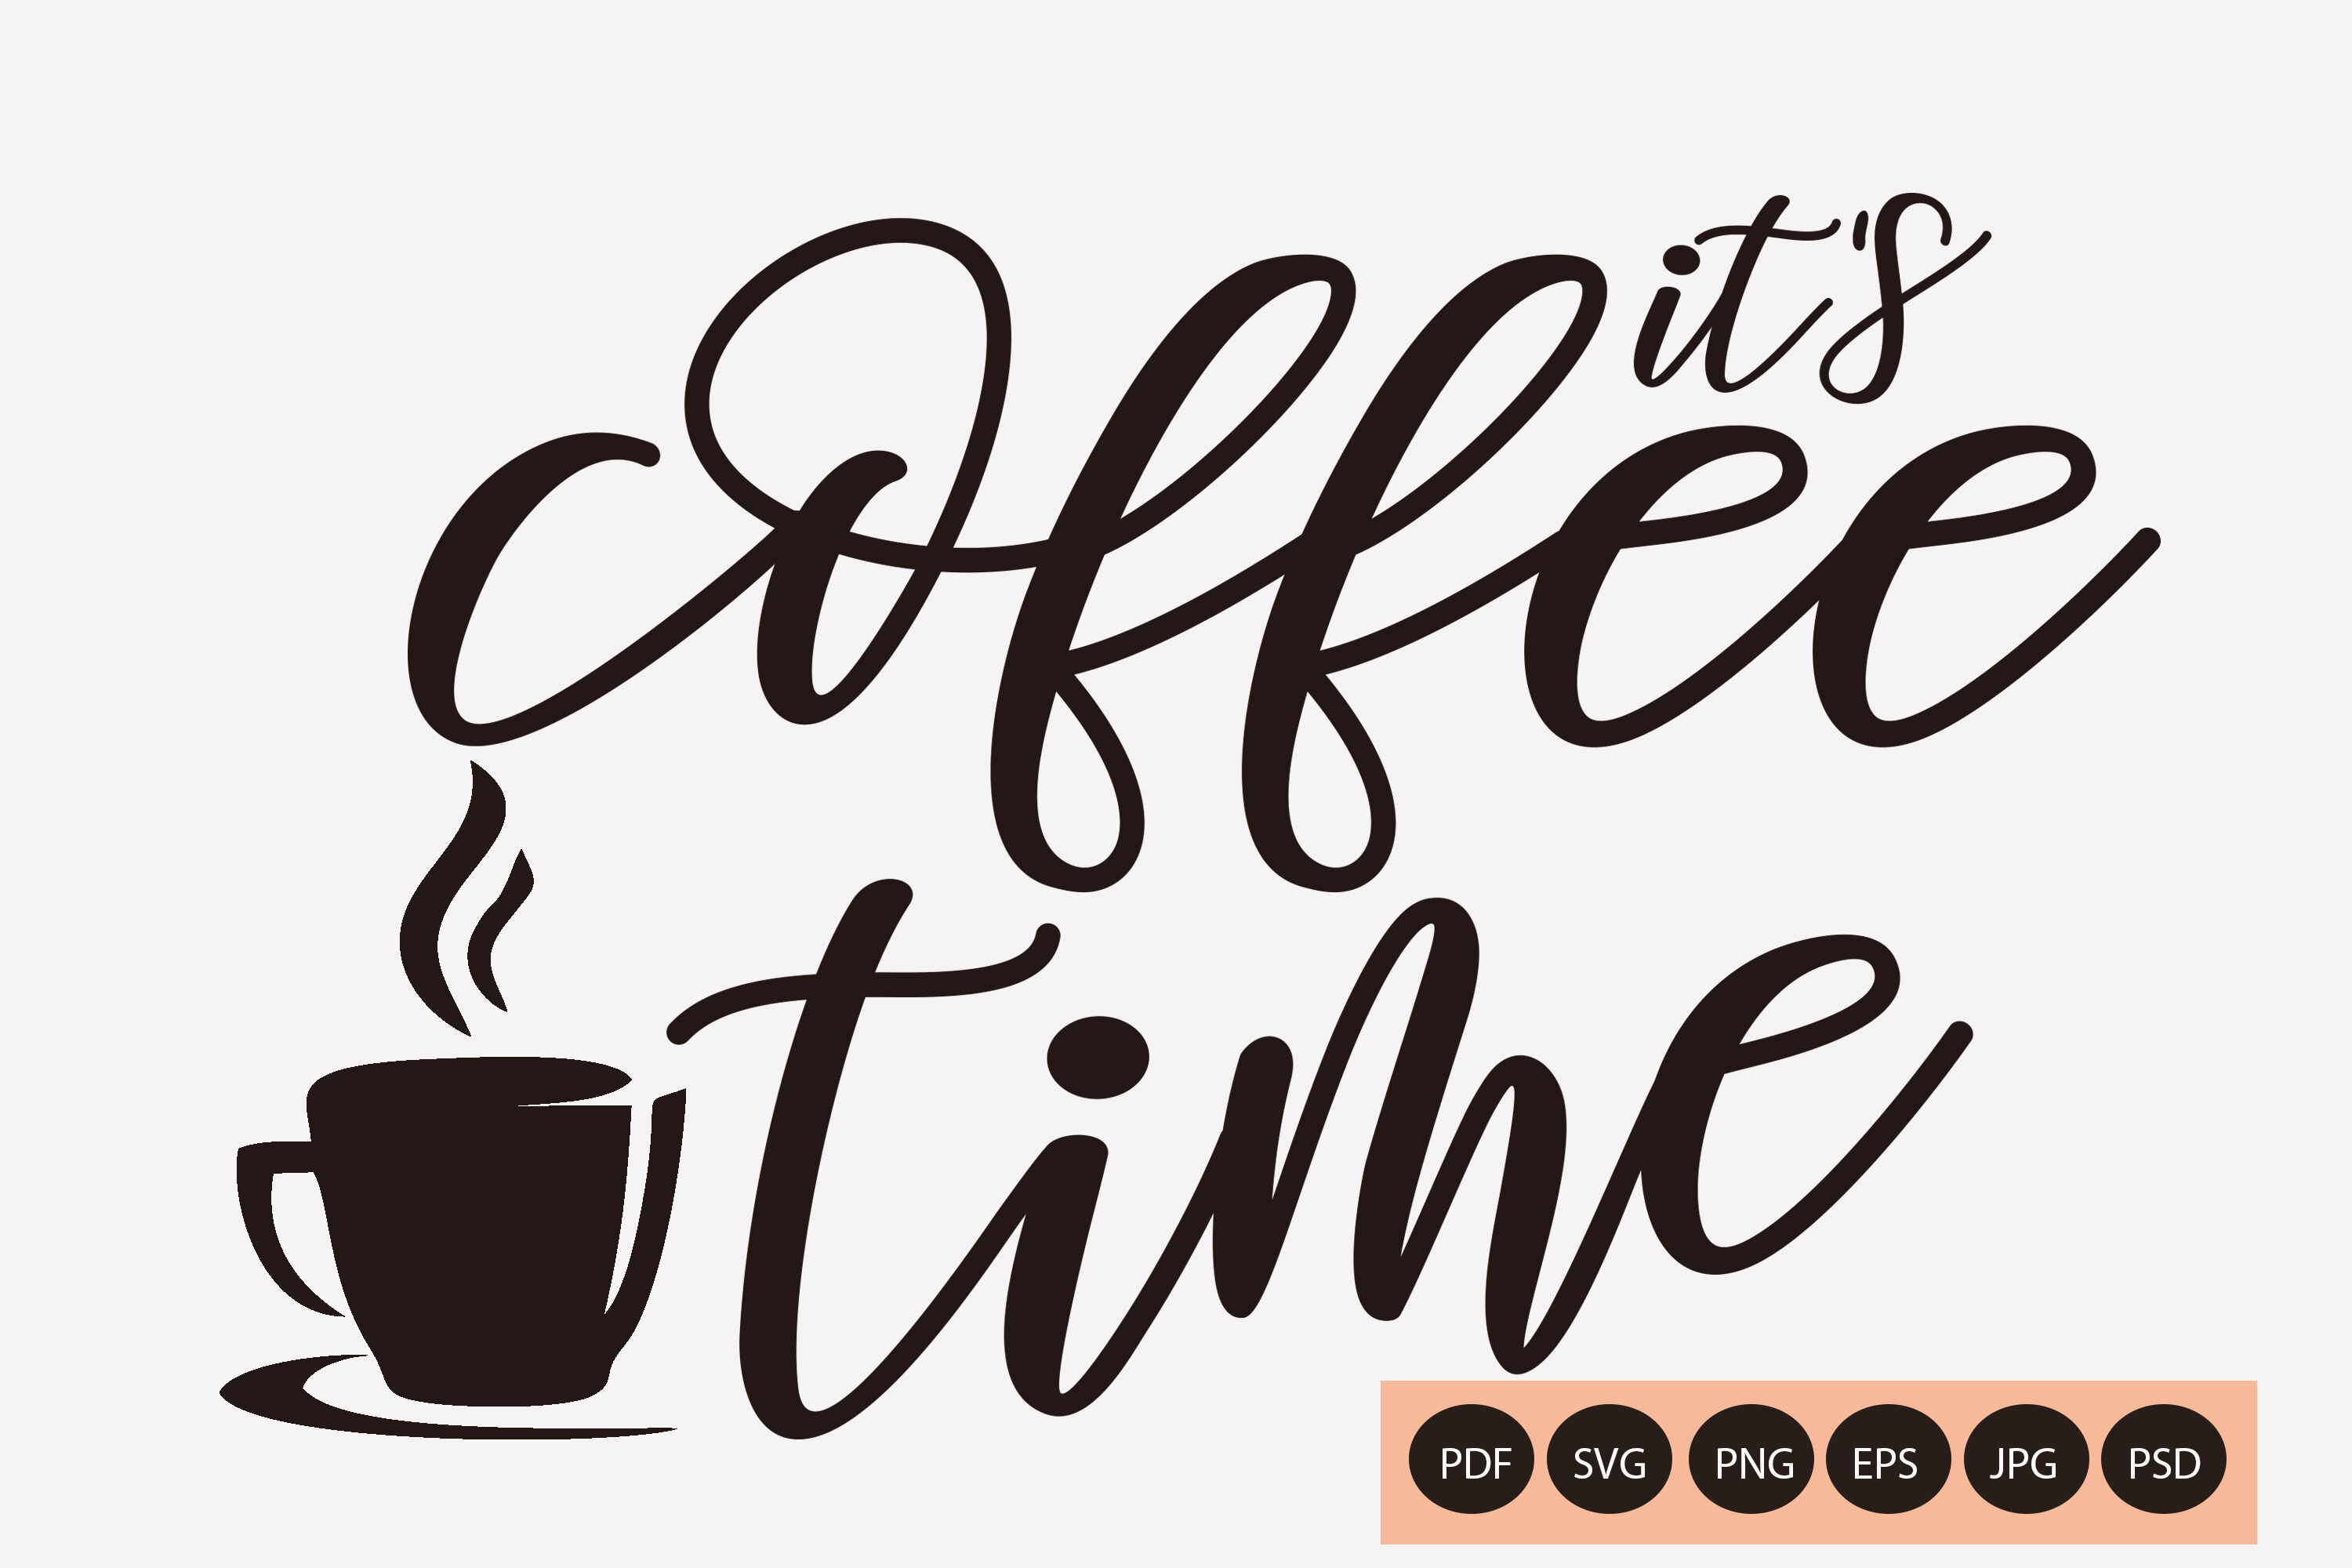 Download It S Coffee Time Svg Png Pdf Eps Jpg And Psd By Mrletters Thehungryjpeg Com